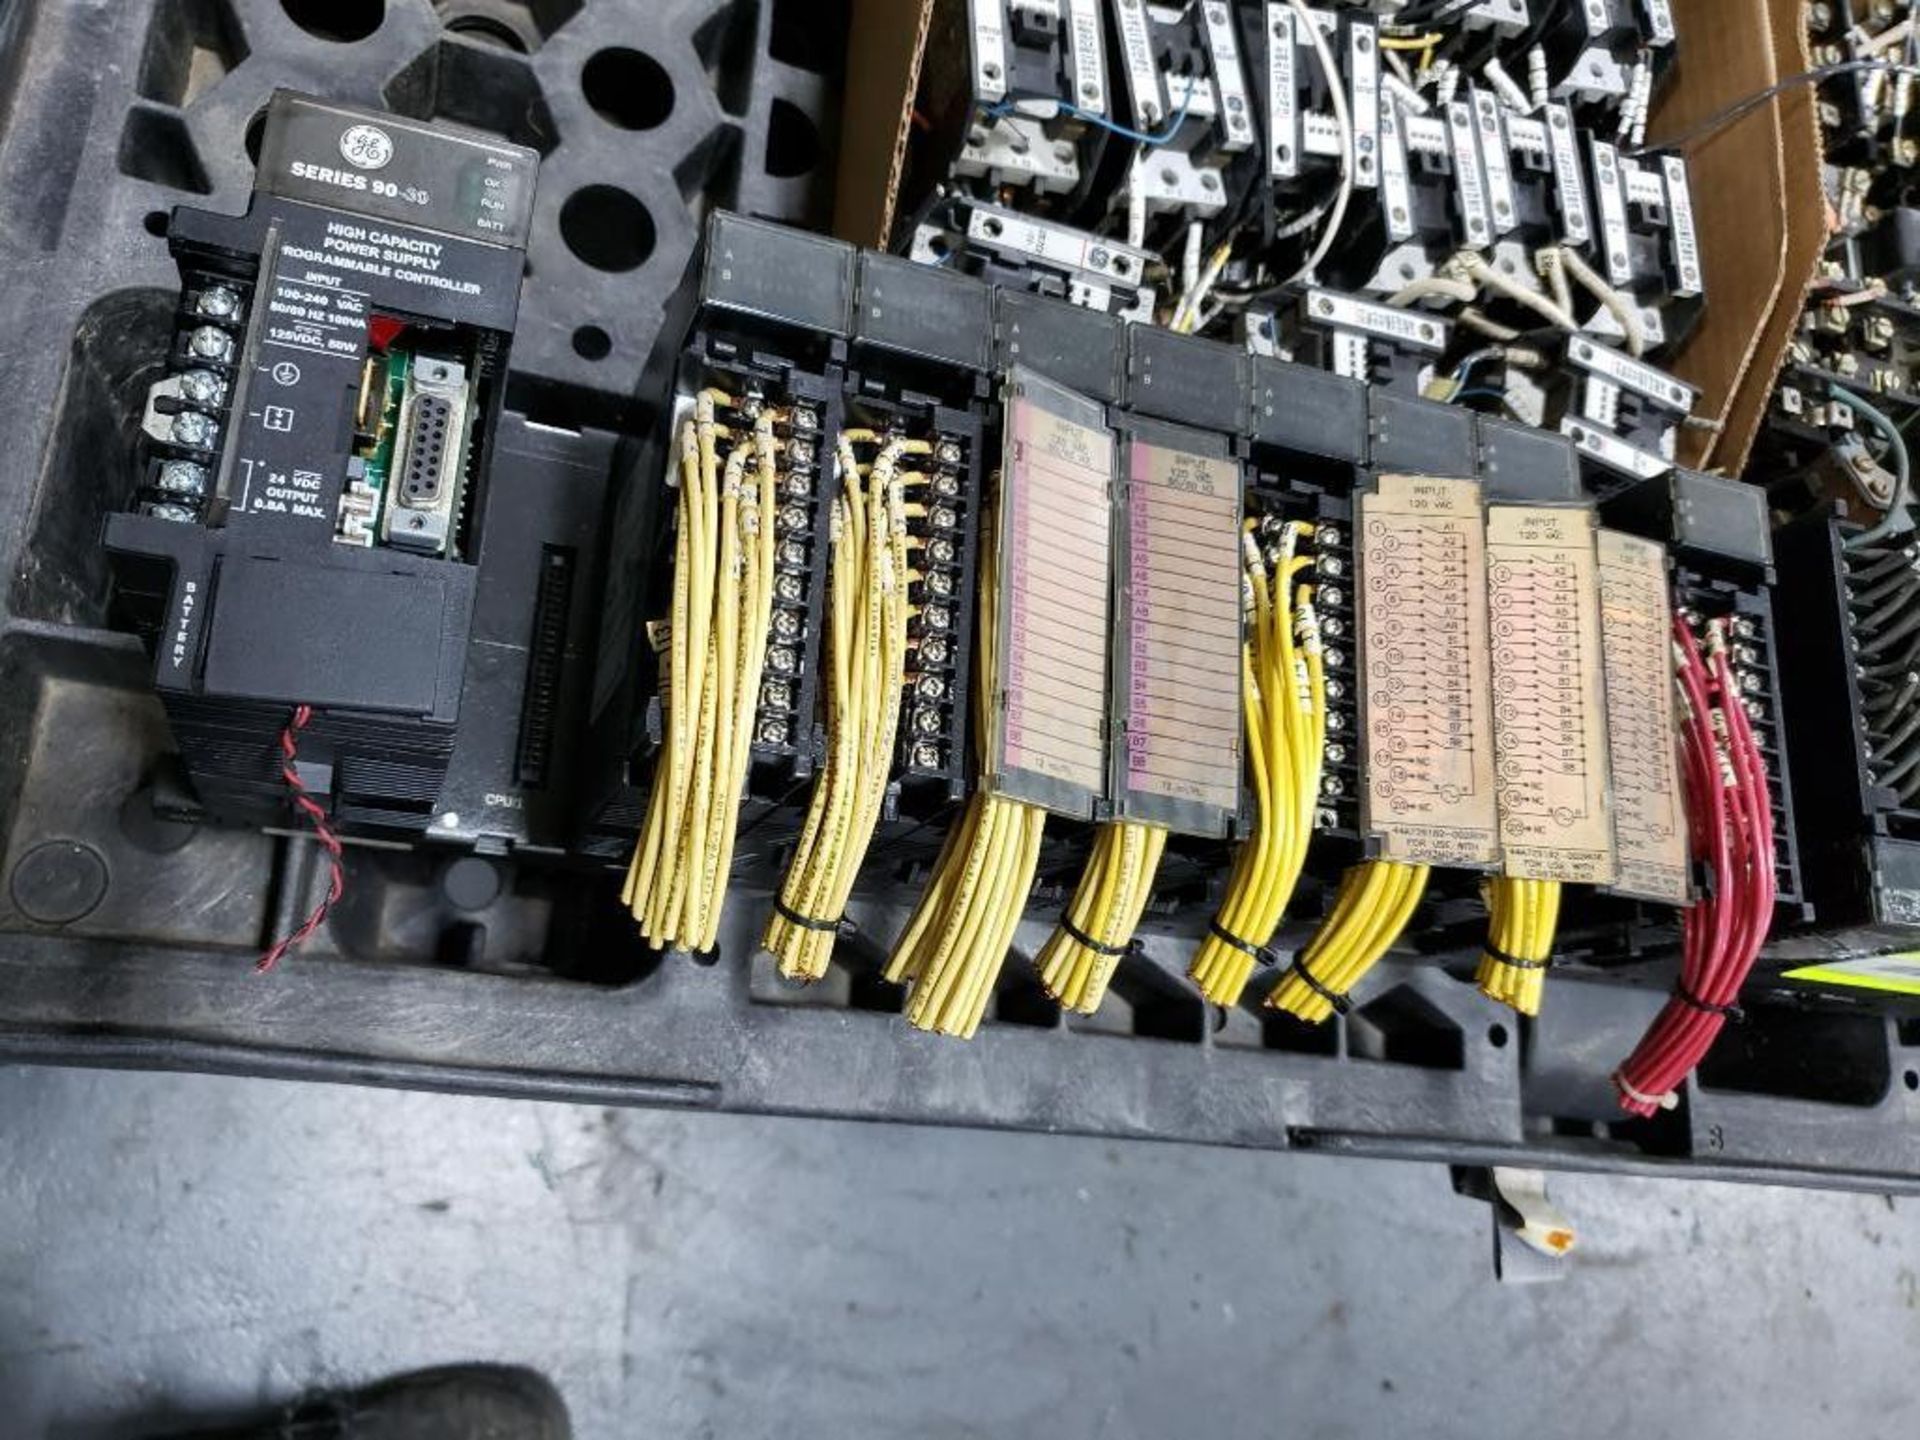 Qty 3 - GE Fanuc PLC racks with cards.